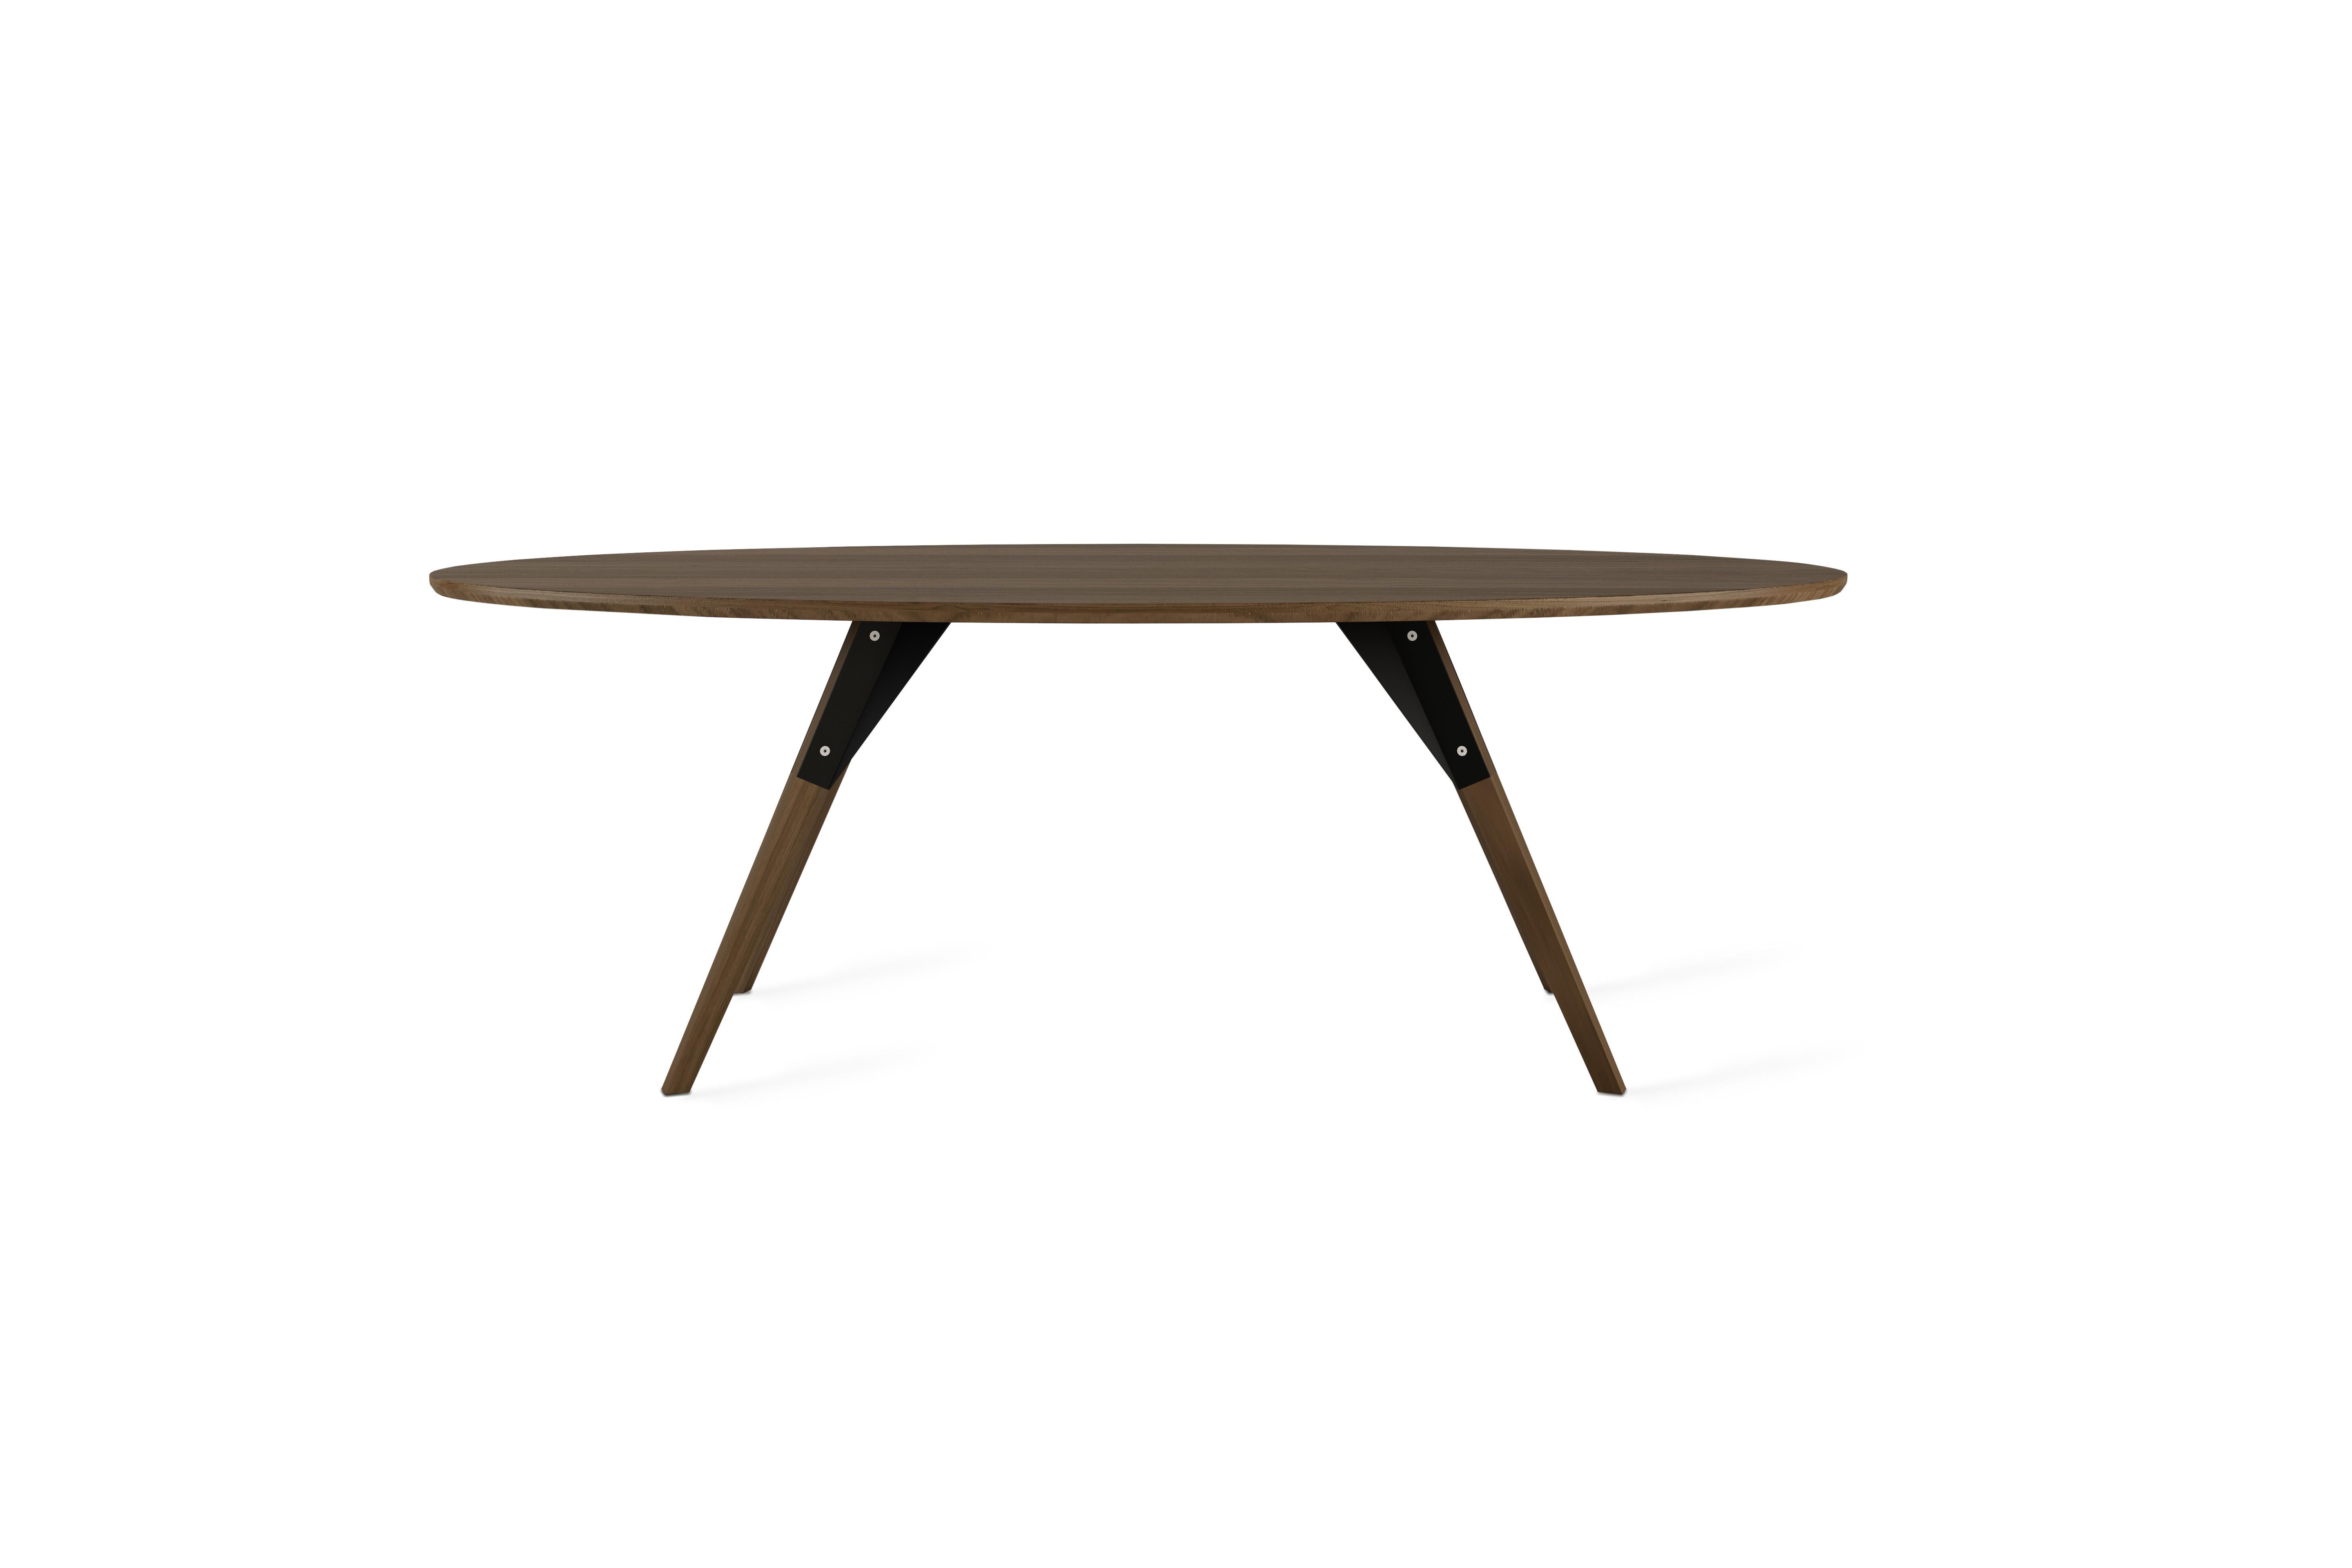 The Clarke Collection comes in ten different table top sizes, two wood species, and two metal finishes. The exposed stainless steel bolts blur the line between Scandinavian and Industrial styles.
 